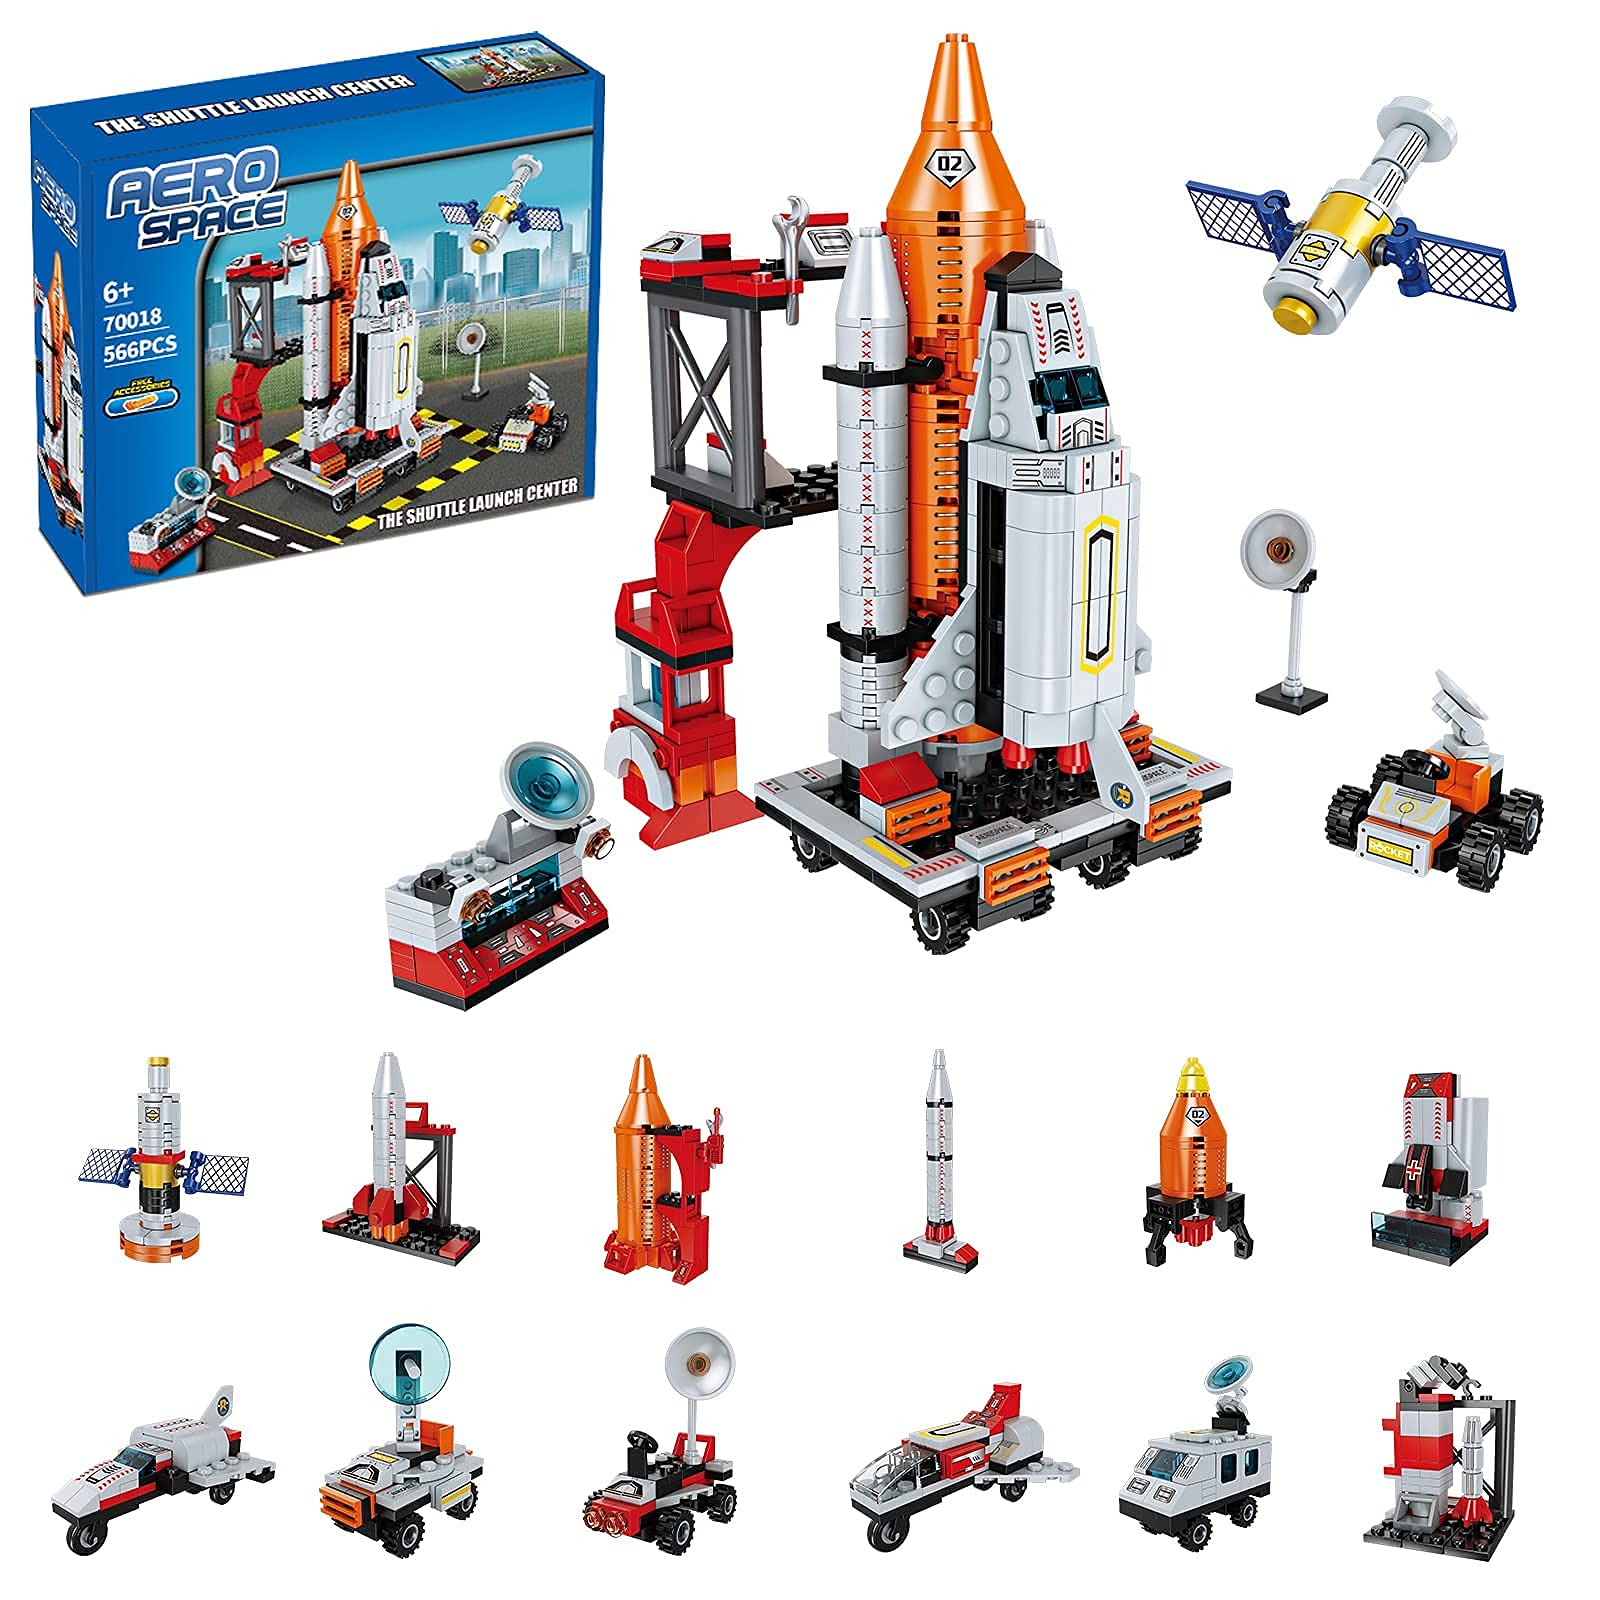 chenxuanbro Space Exploration Shuttle Toys 12-in-1 STEM Aerospace Building Kit Toy with Heavy Transport Rocket&Launcher Best Gifts for 6-12 Year Old Boys (566 Pieces)